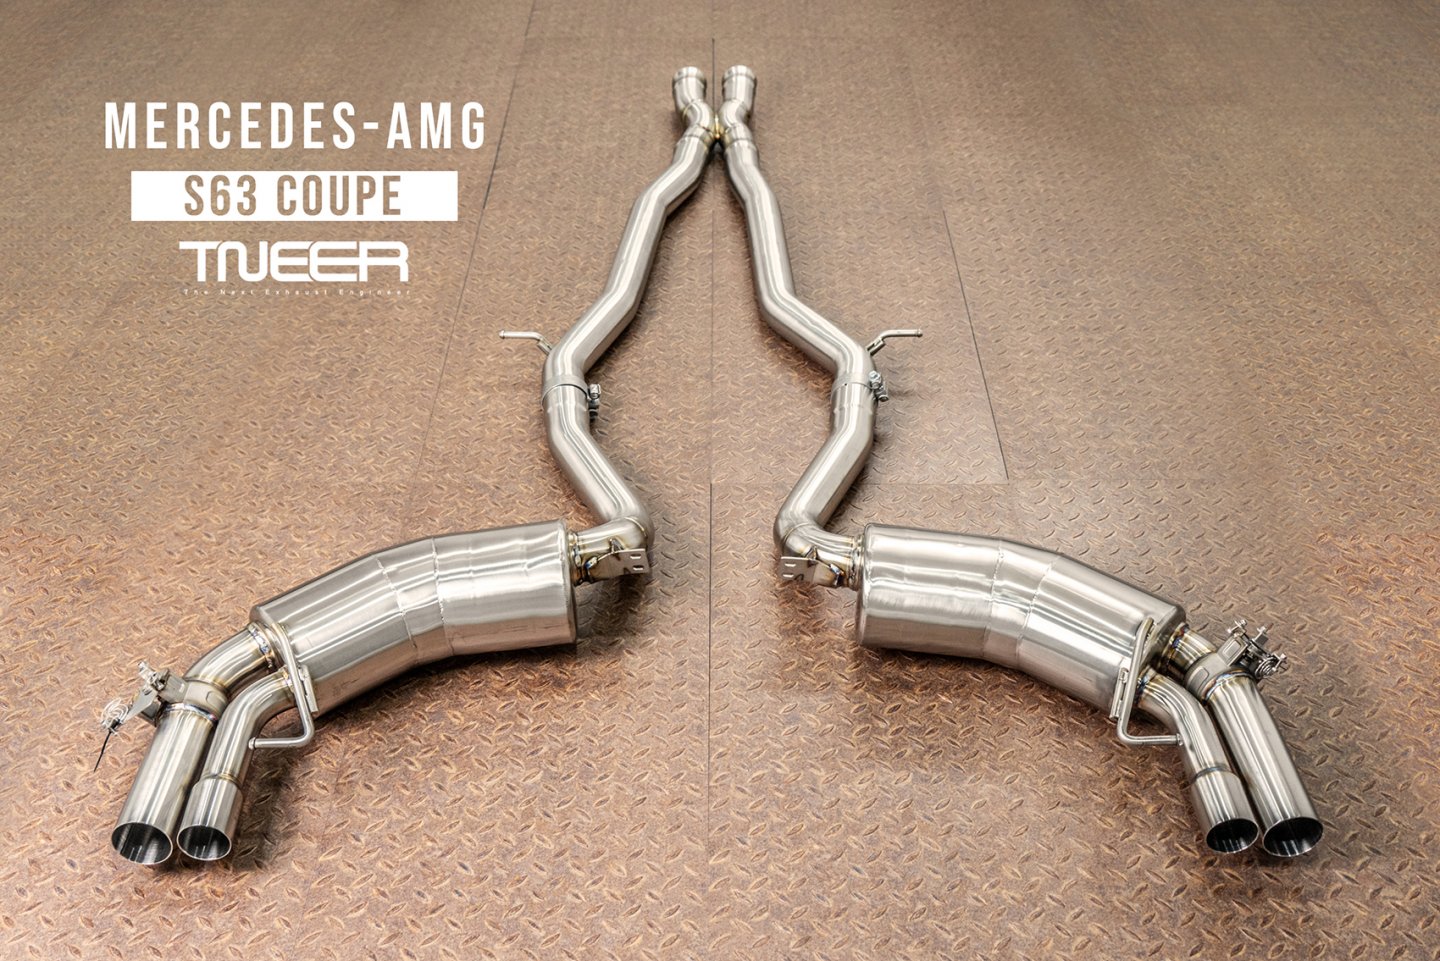 Mercedes-AMG C217 S63 Coupe TNEER High-Performance Downpipes